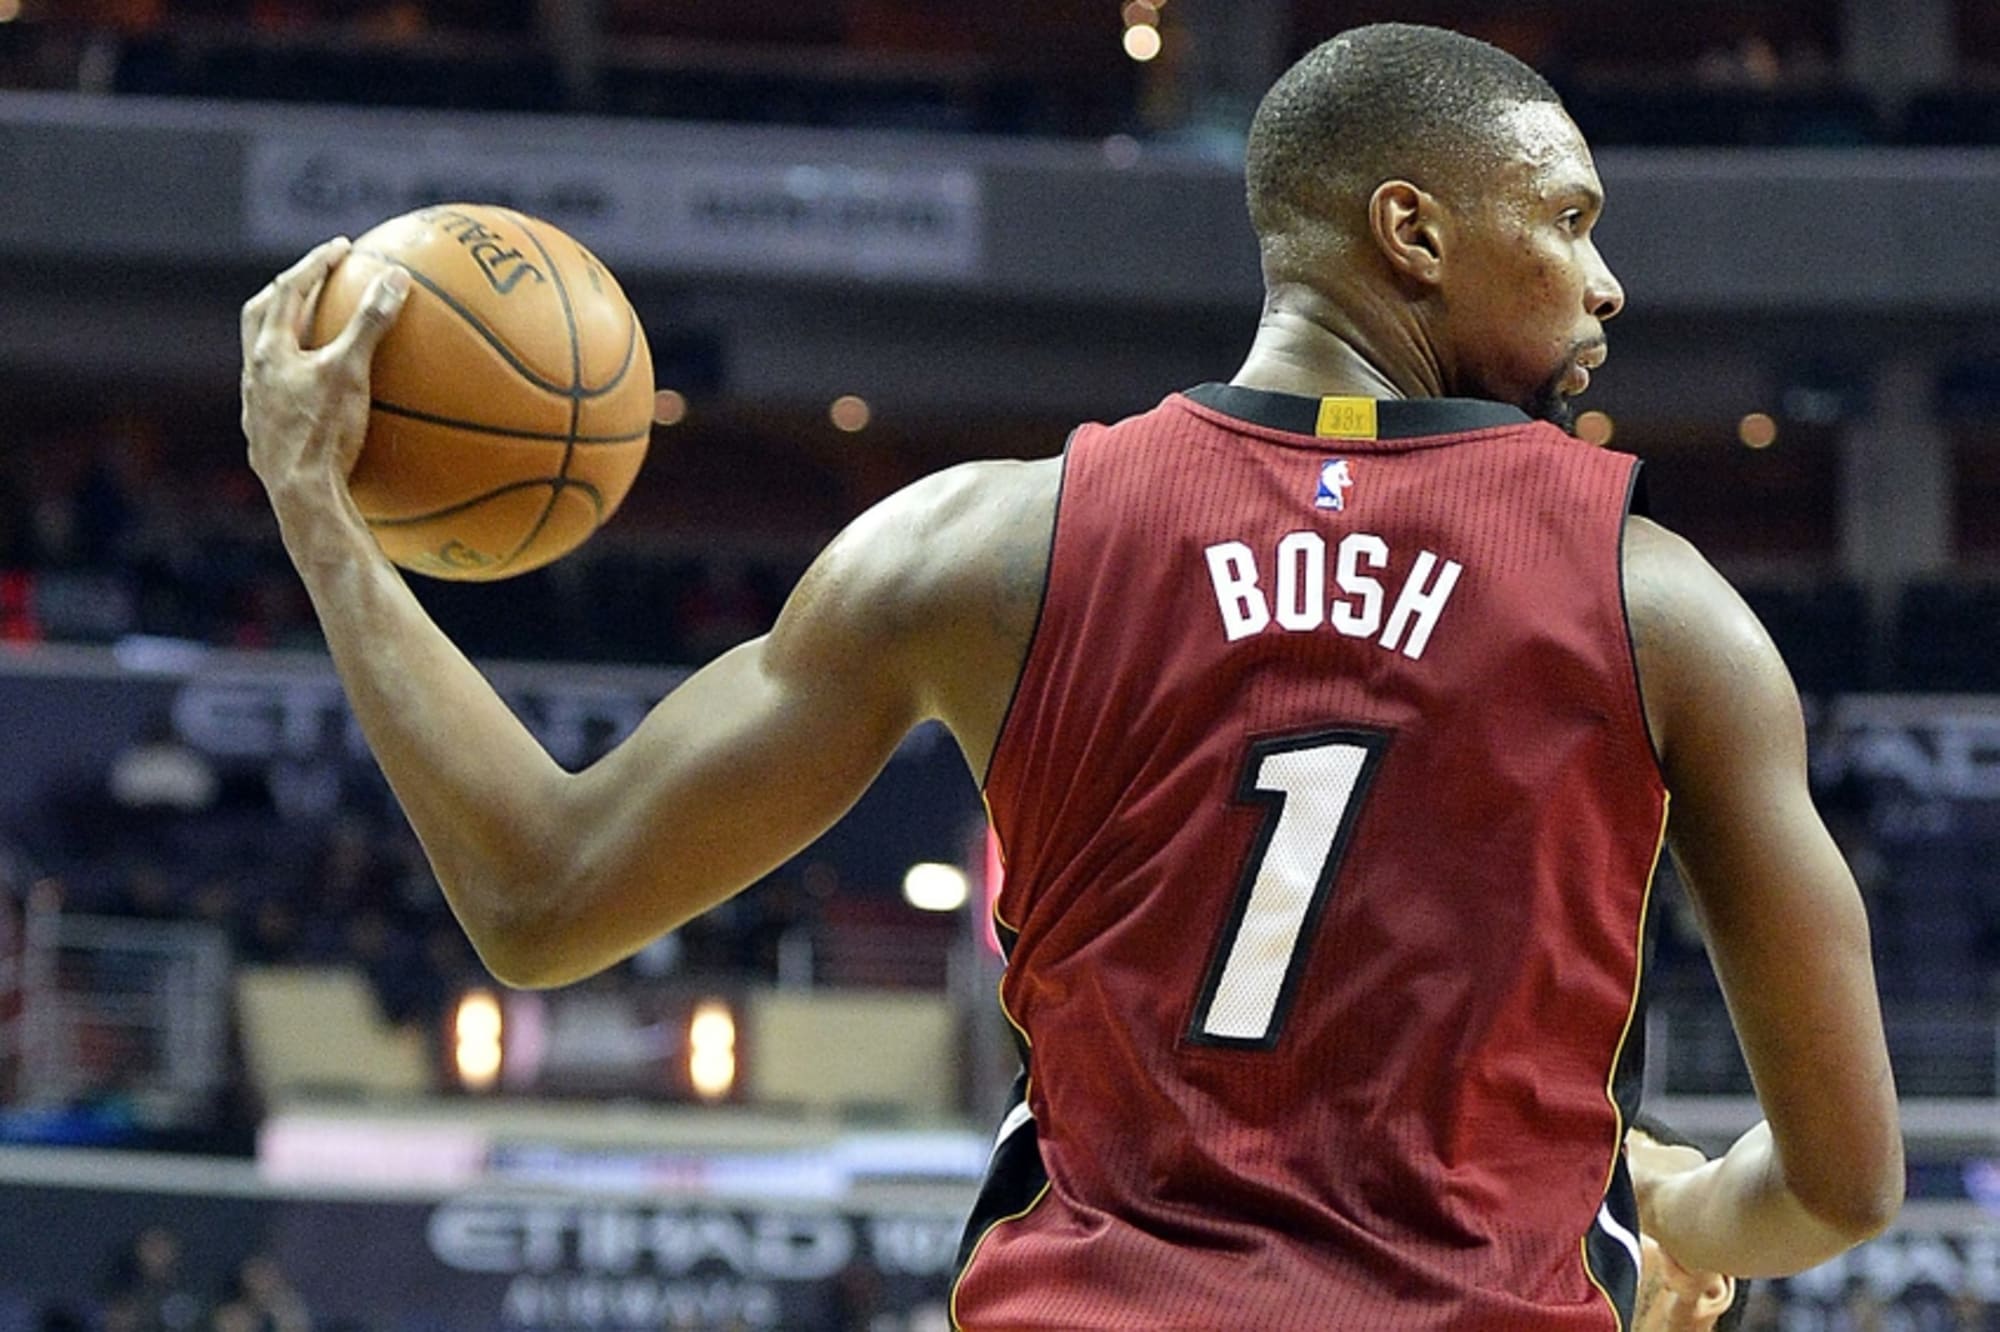 Chris Bosh and blood clots: Five things you should know